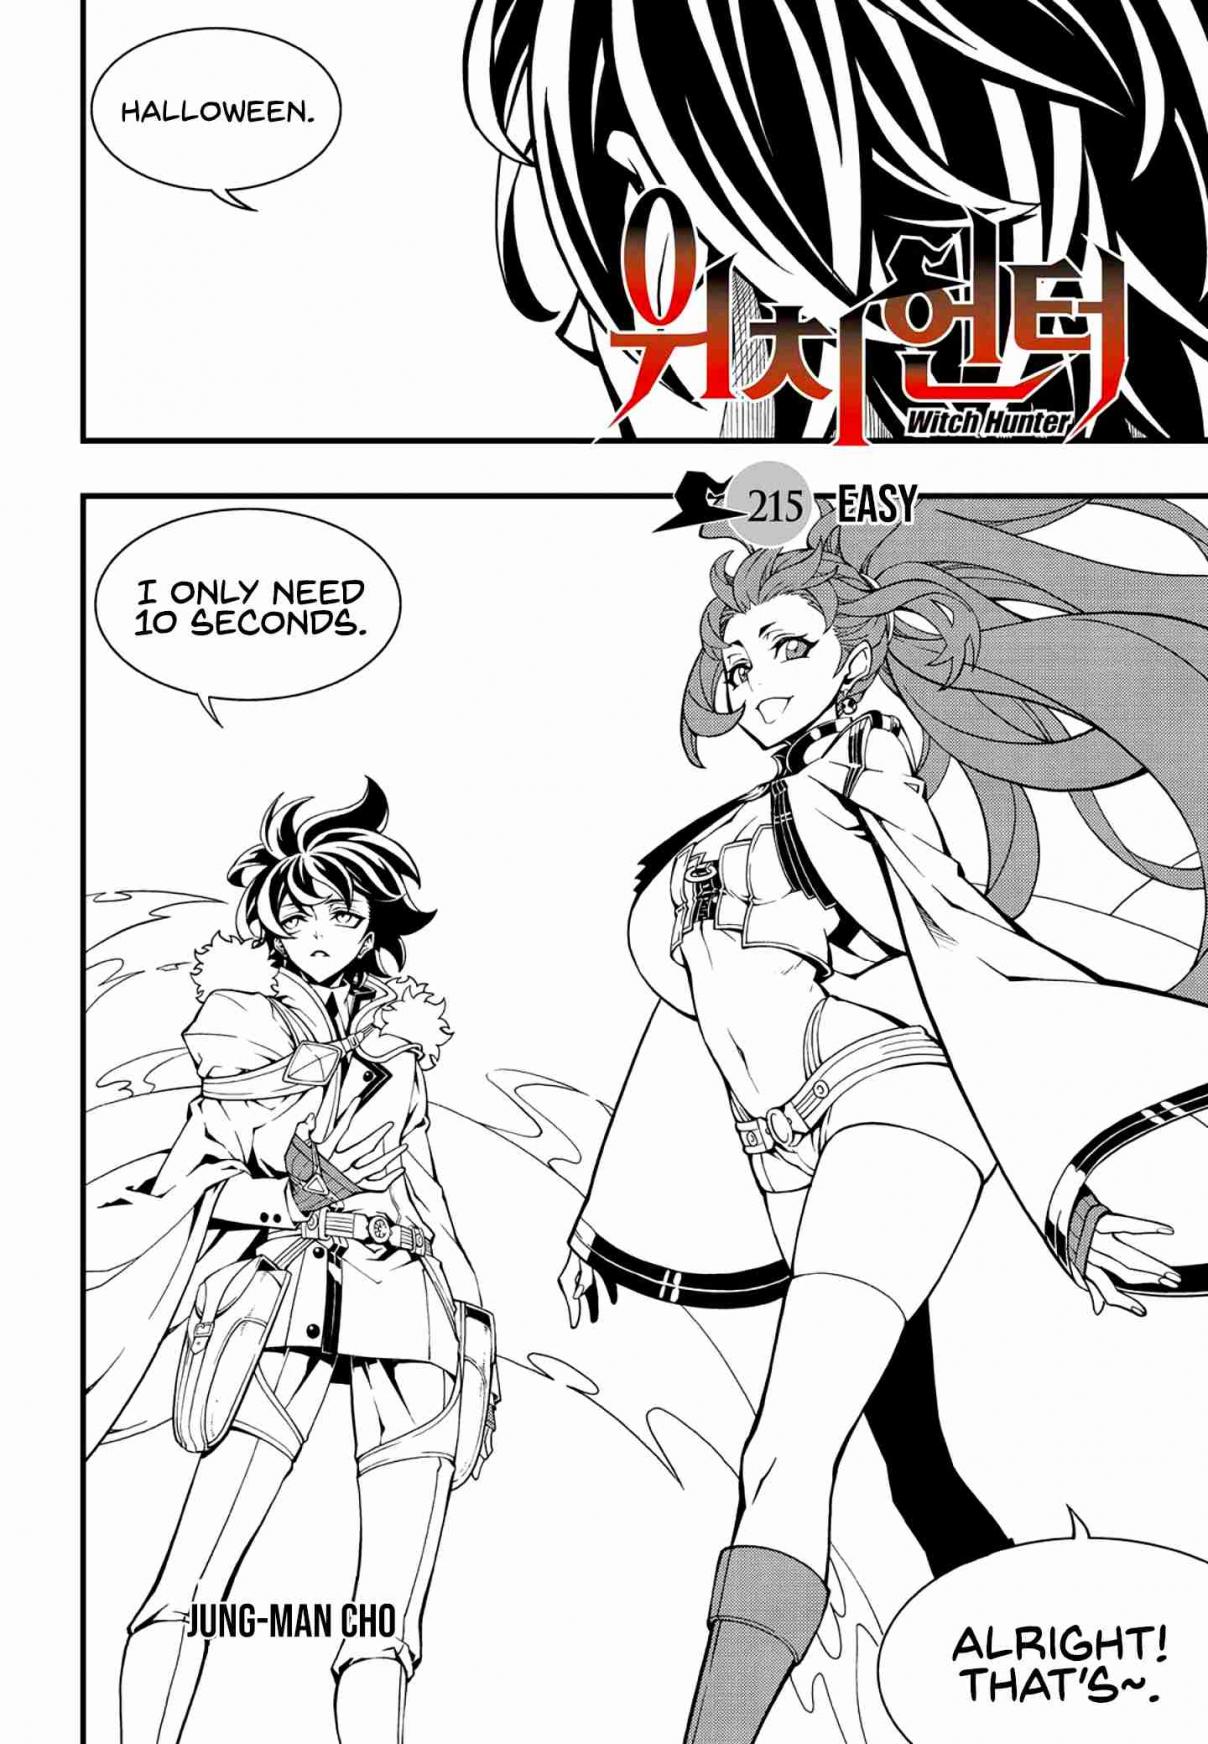 Witch Hunter Ch. 215 Easy